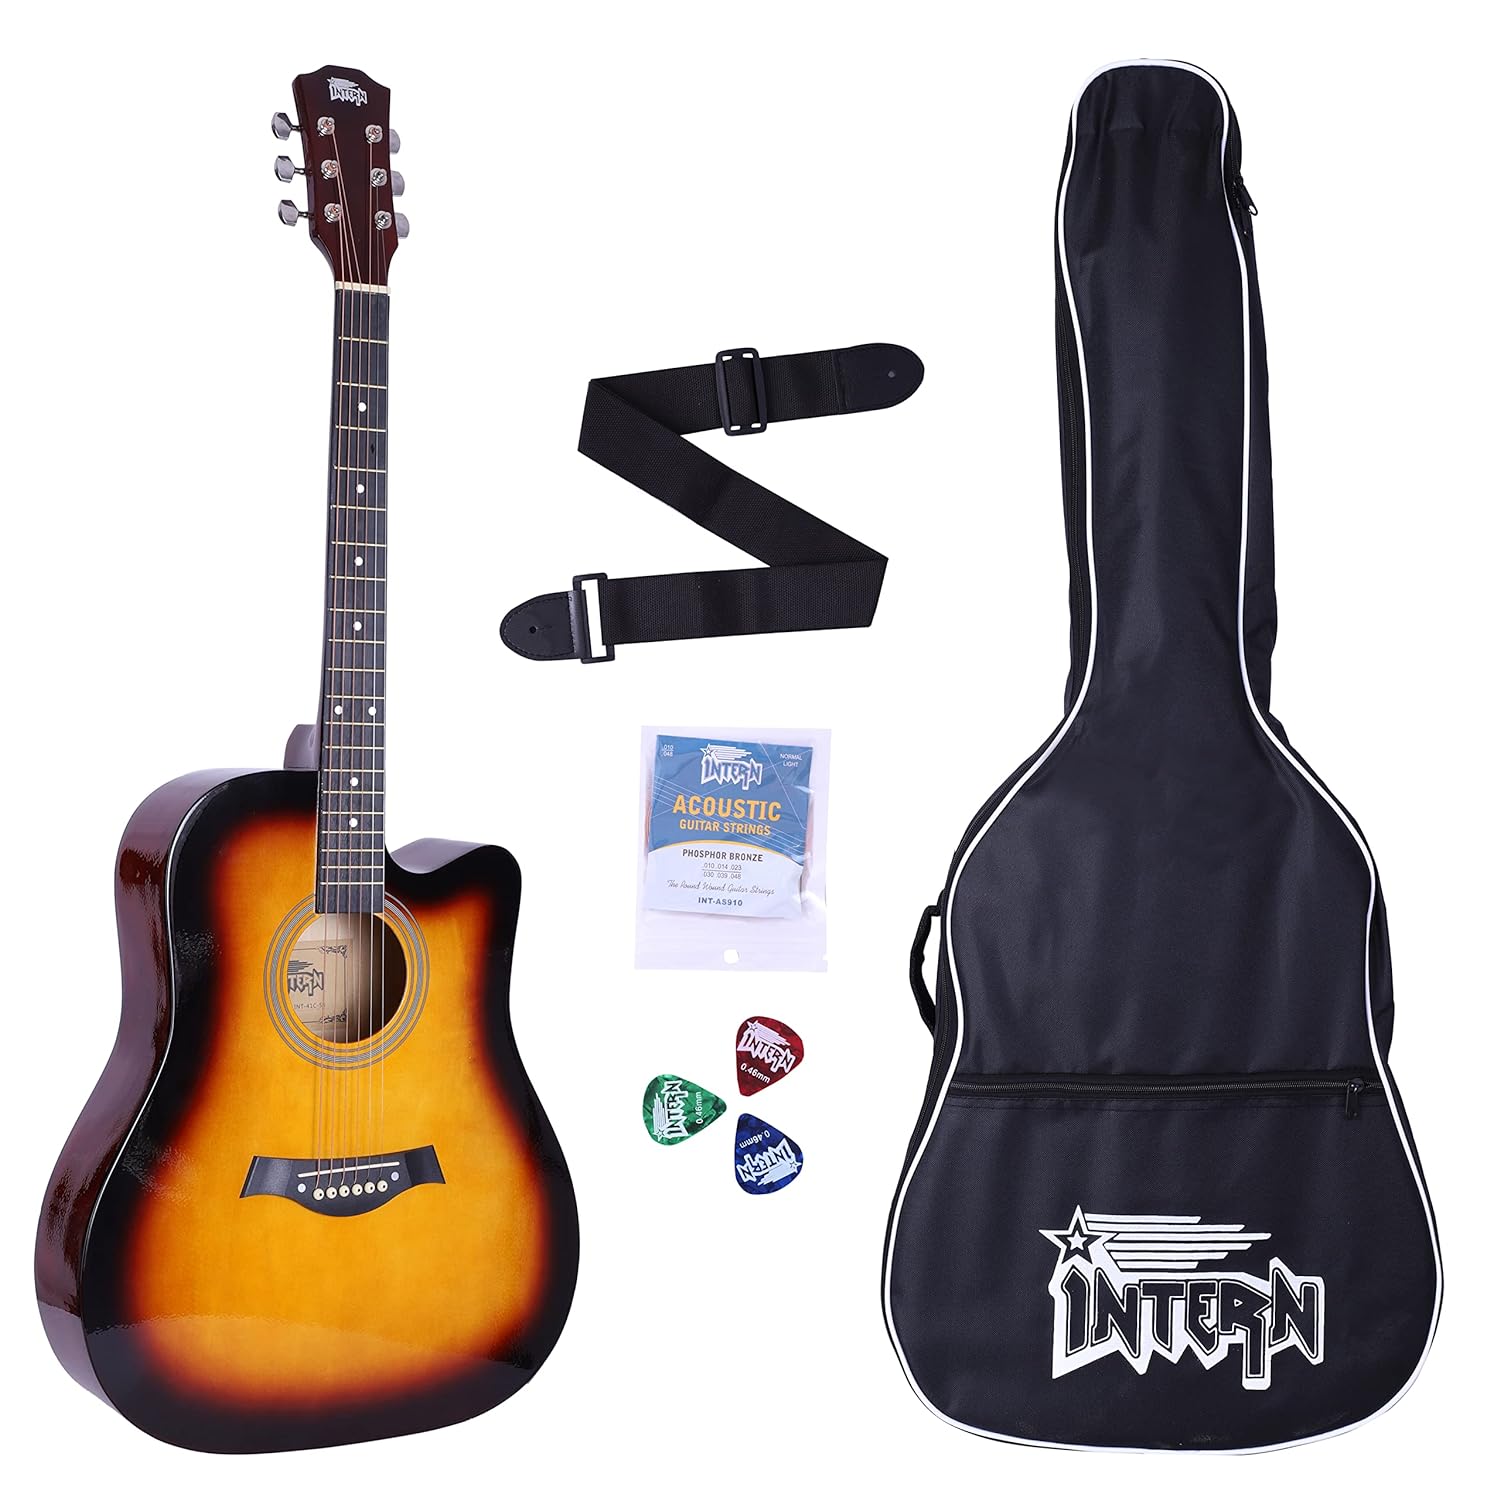 INTERN 41 inches Acoustic Guitar with truss rod. Includes carry bag, strings pack, strap & plectrums. Premium Wooden durable built, tonal stability & for all age-groups(Glossy Sunburst).…